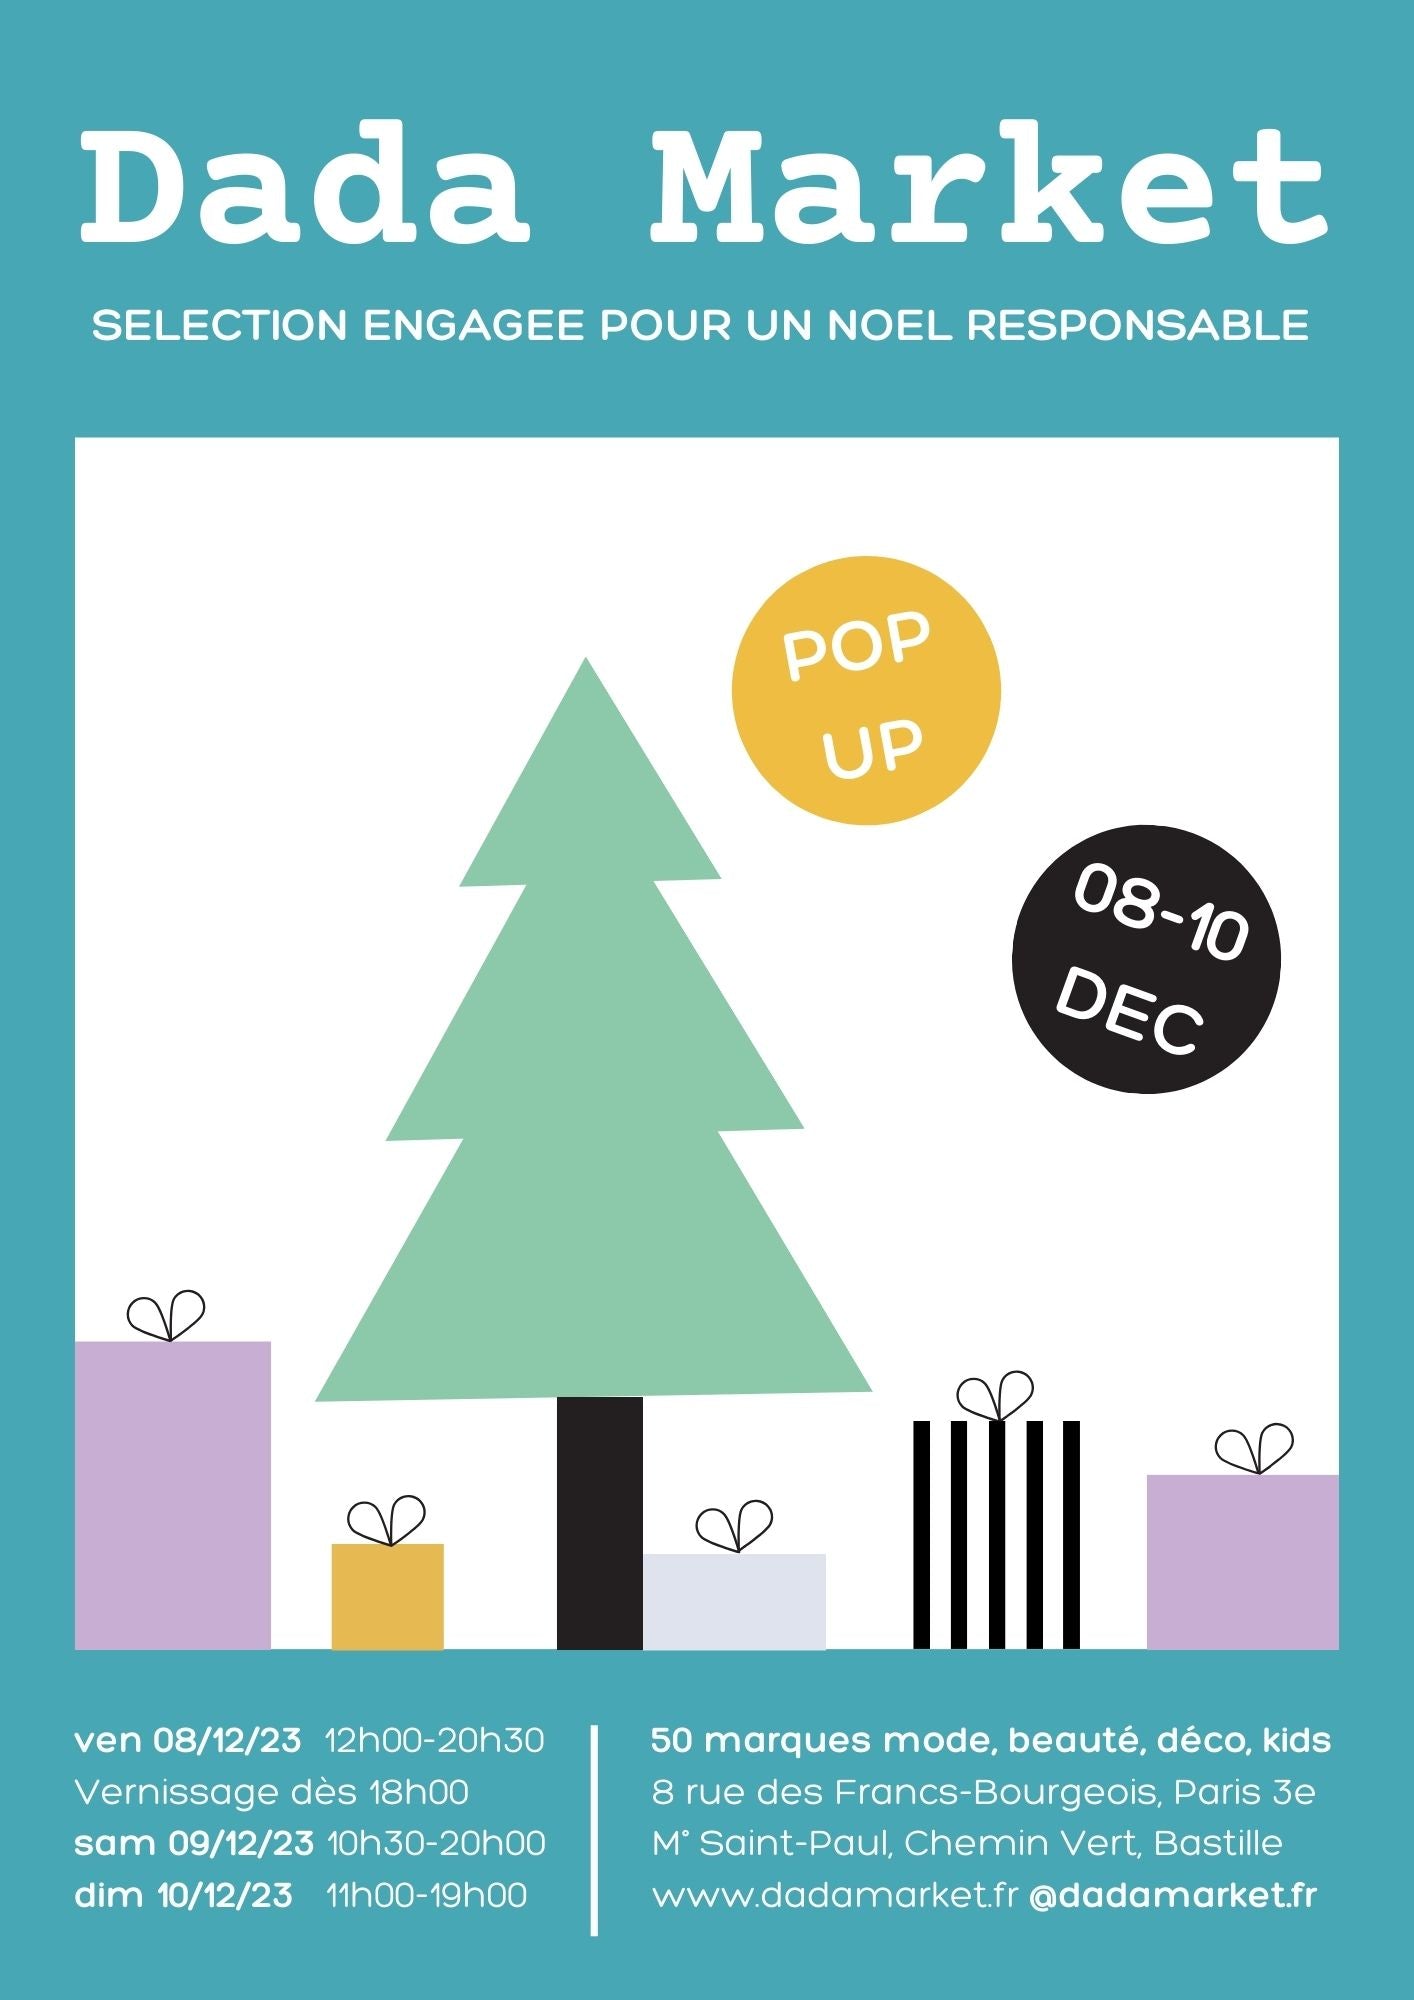 less is more at Dada Market: for a sustainable Christmas